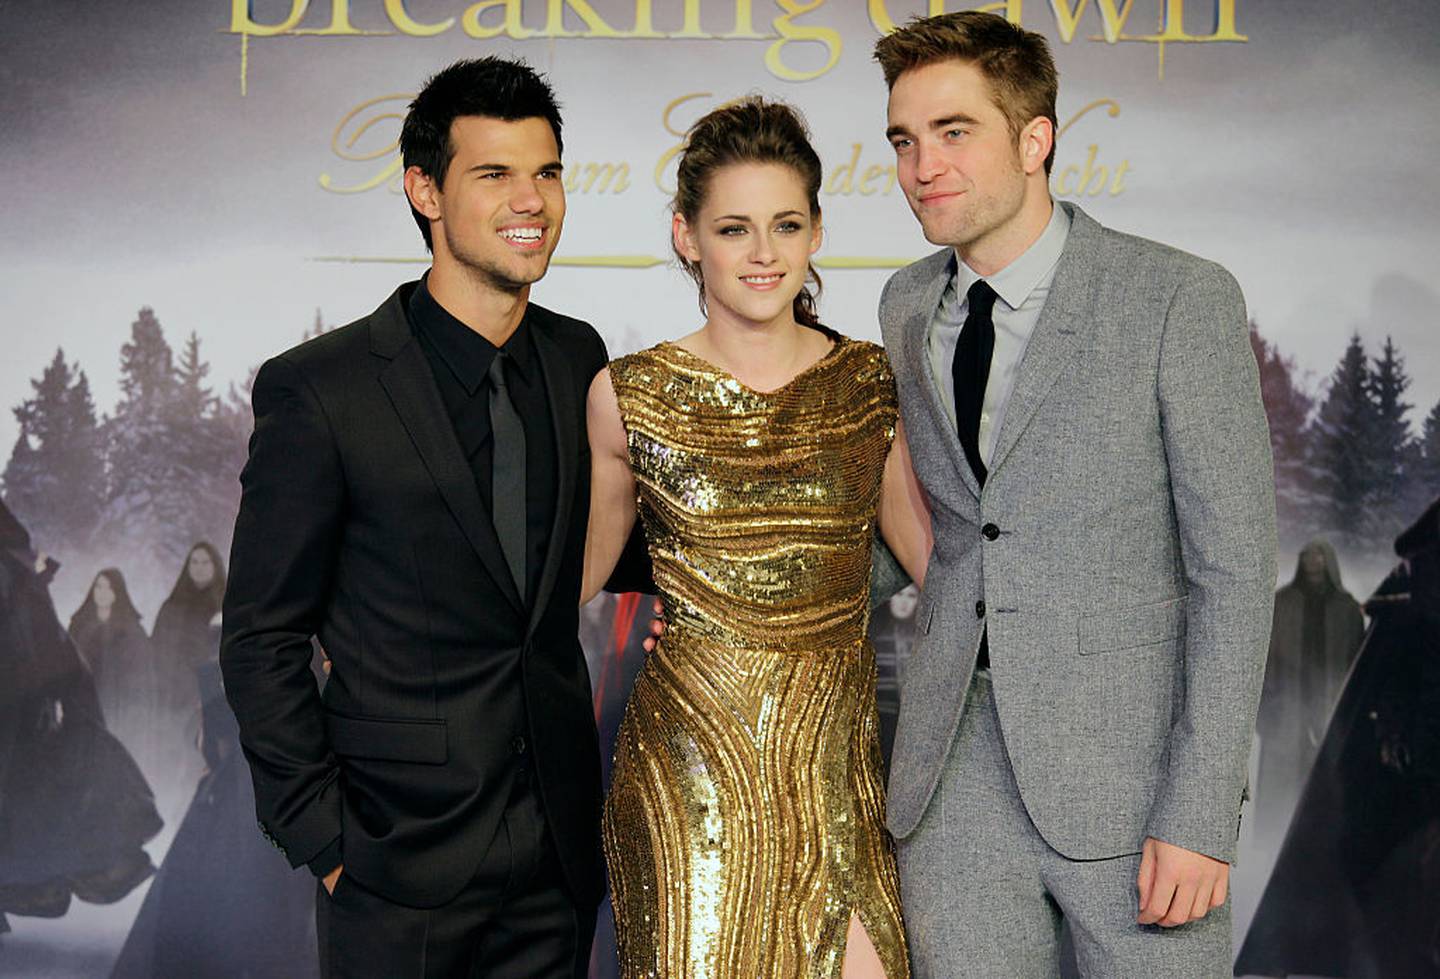 L to R: Taylor Lautner, Kristen Stewart, and Robert Pattinson attend the premiere for the "Twilight Saga: Breaking Dawn Part 2". Photo / Getty Images